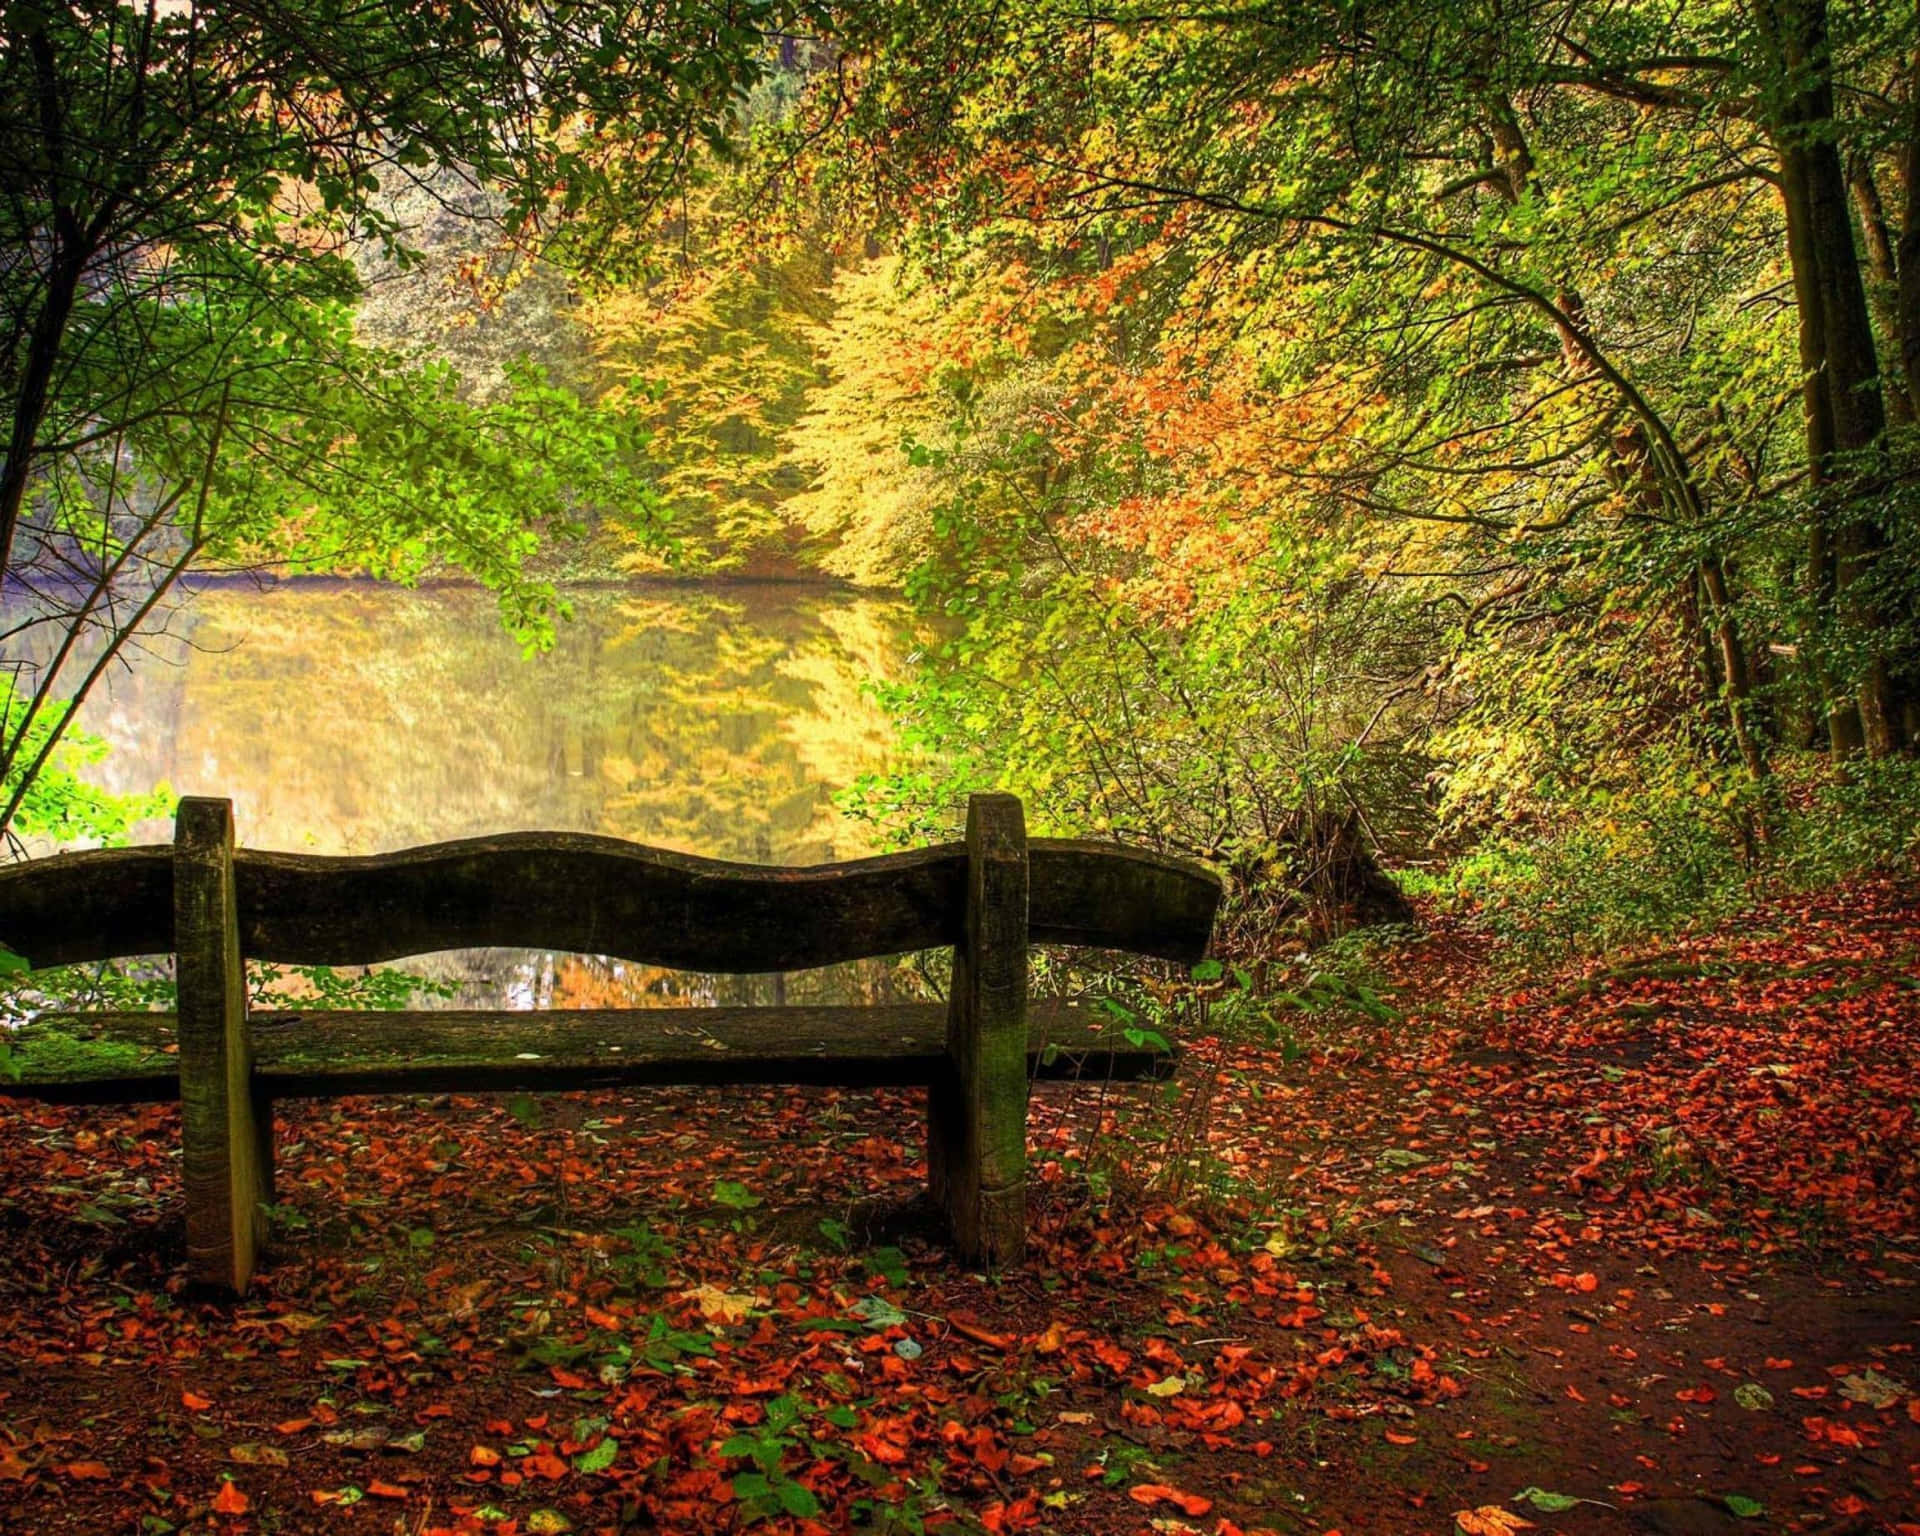 Tranquil Fall Nature Scenery Wallpaper